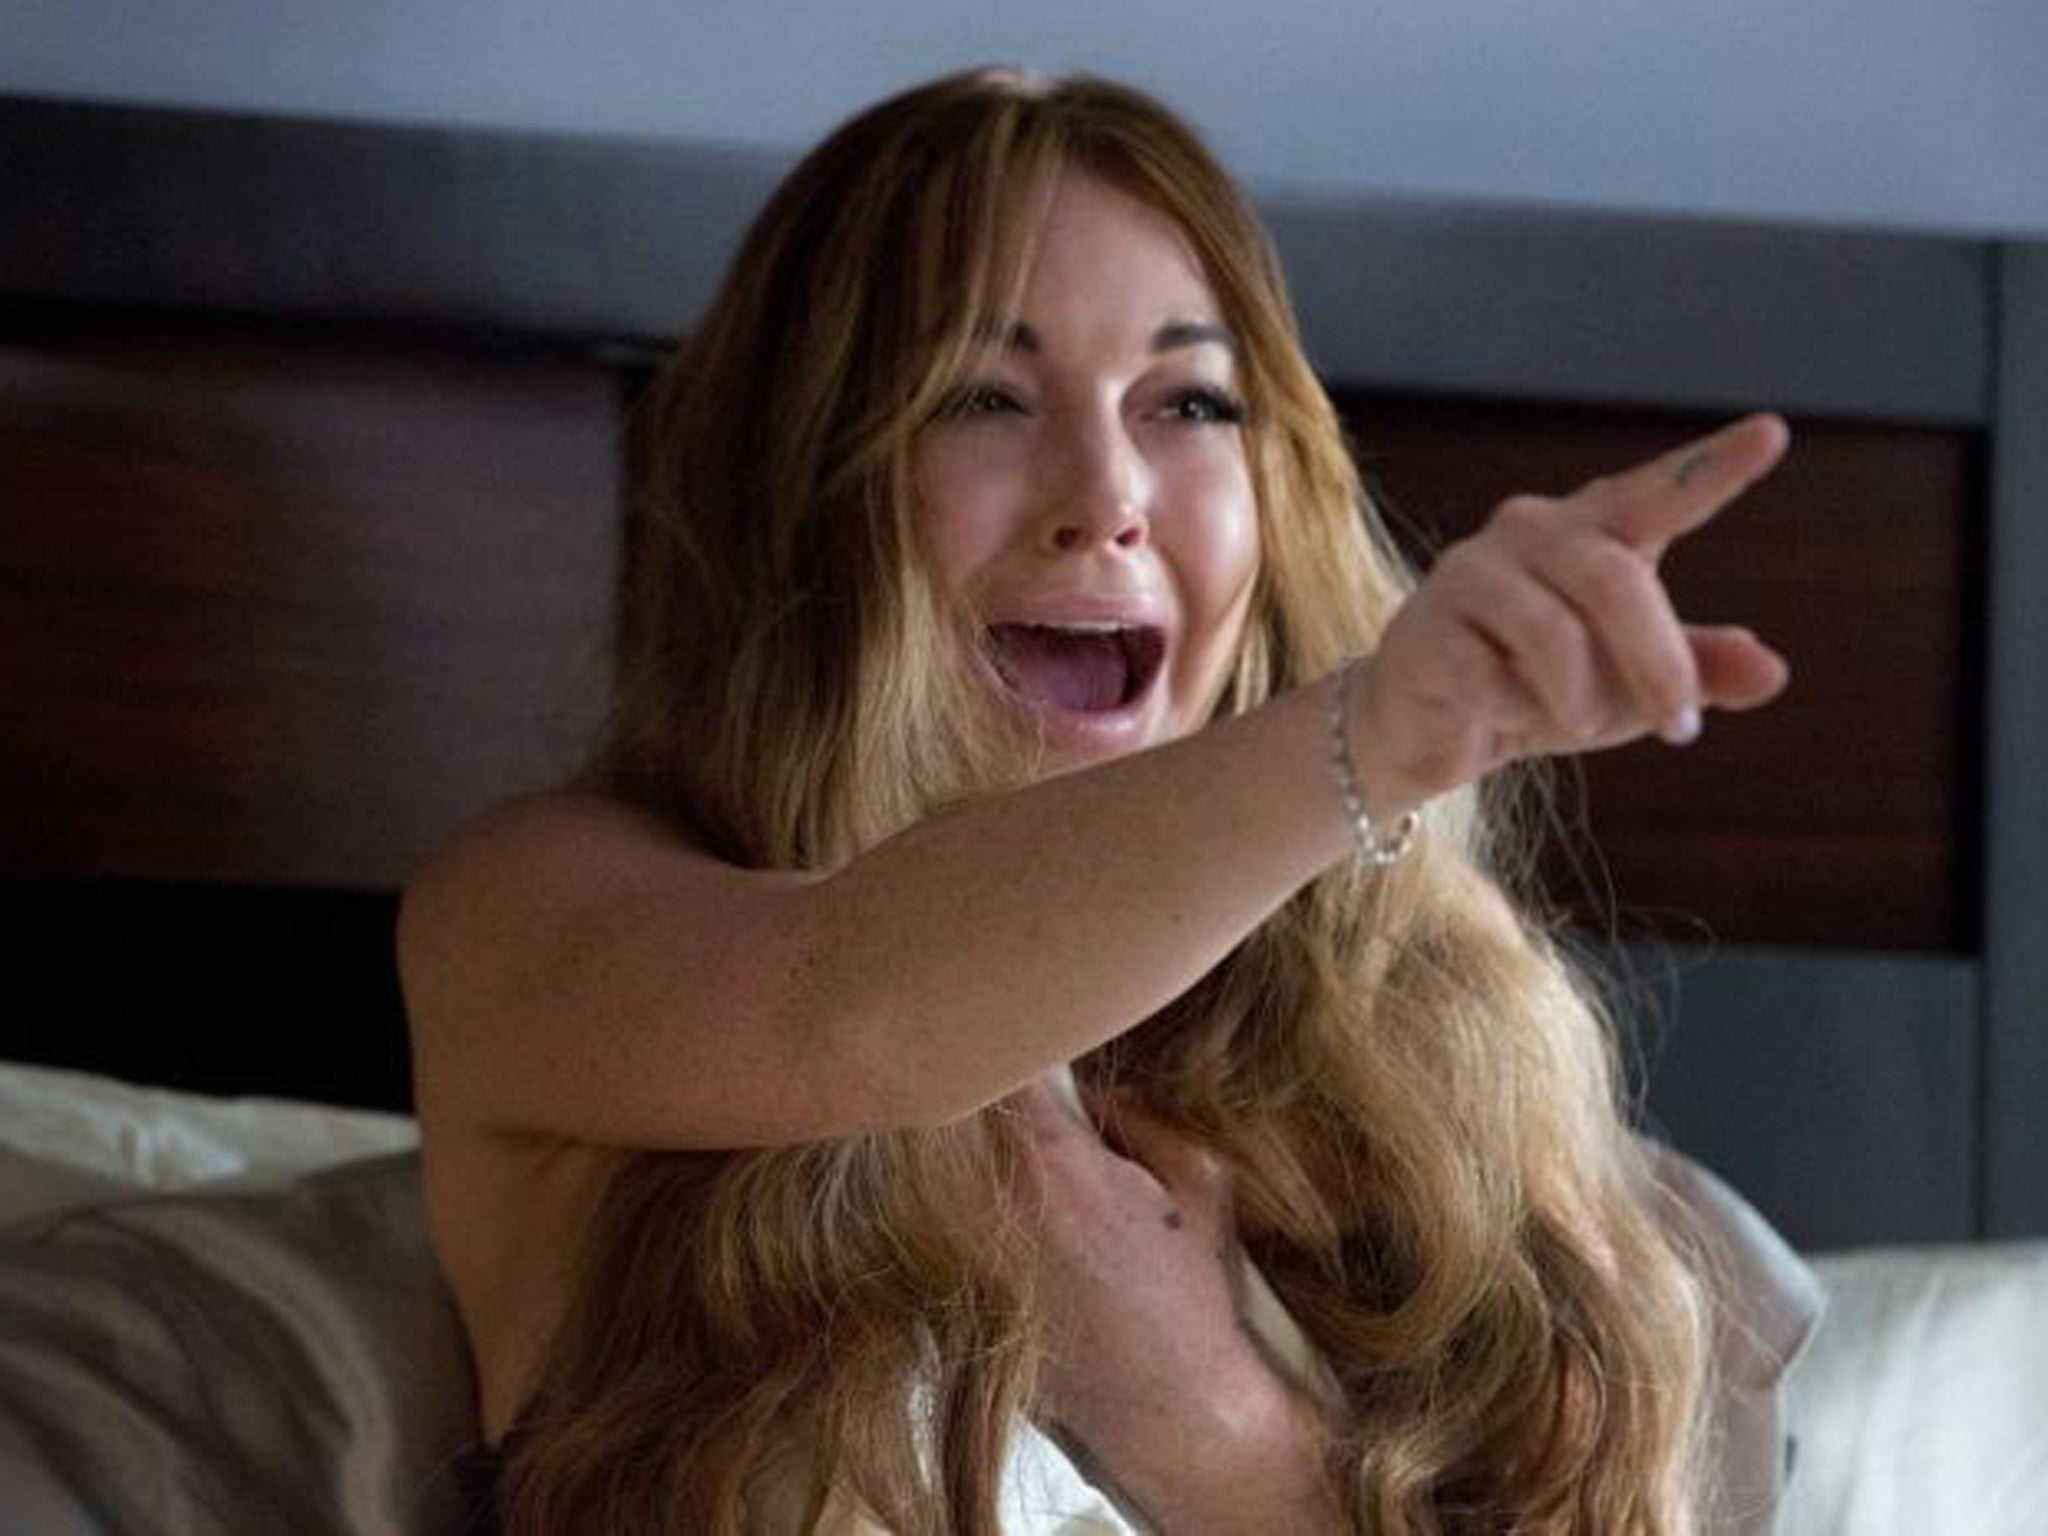 Lindsay Lohan stars alongside Charlie Sheen and Ashley Tisdale in the latest Scary Movie instalment